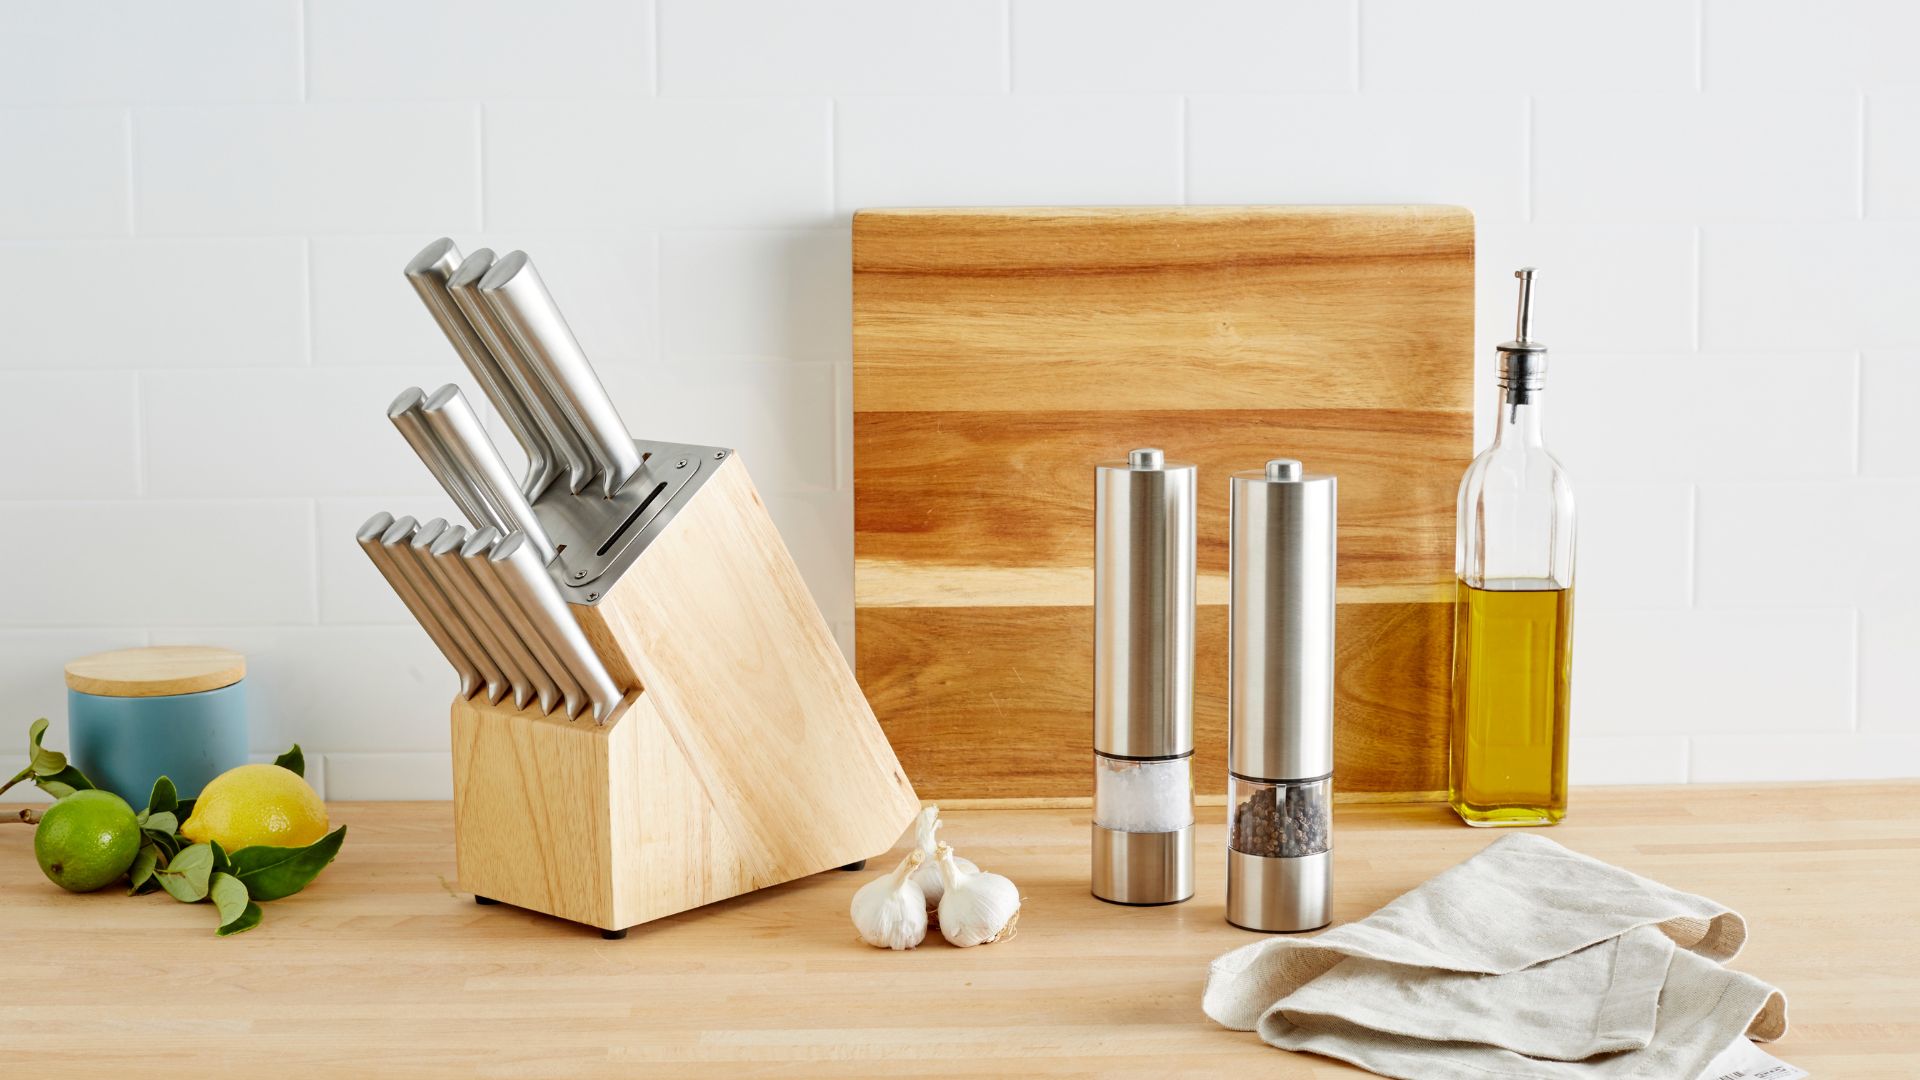 Smith + Nobel 12-Piece Knife Block and a square wooden chopping board